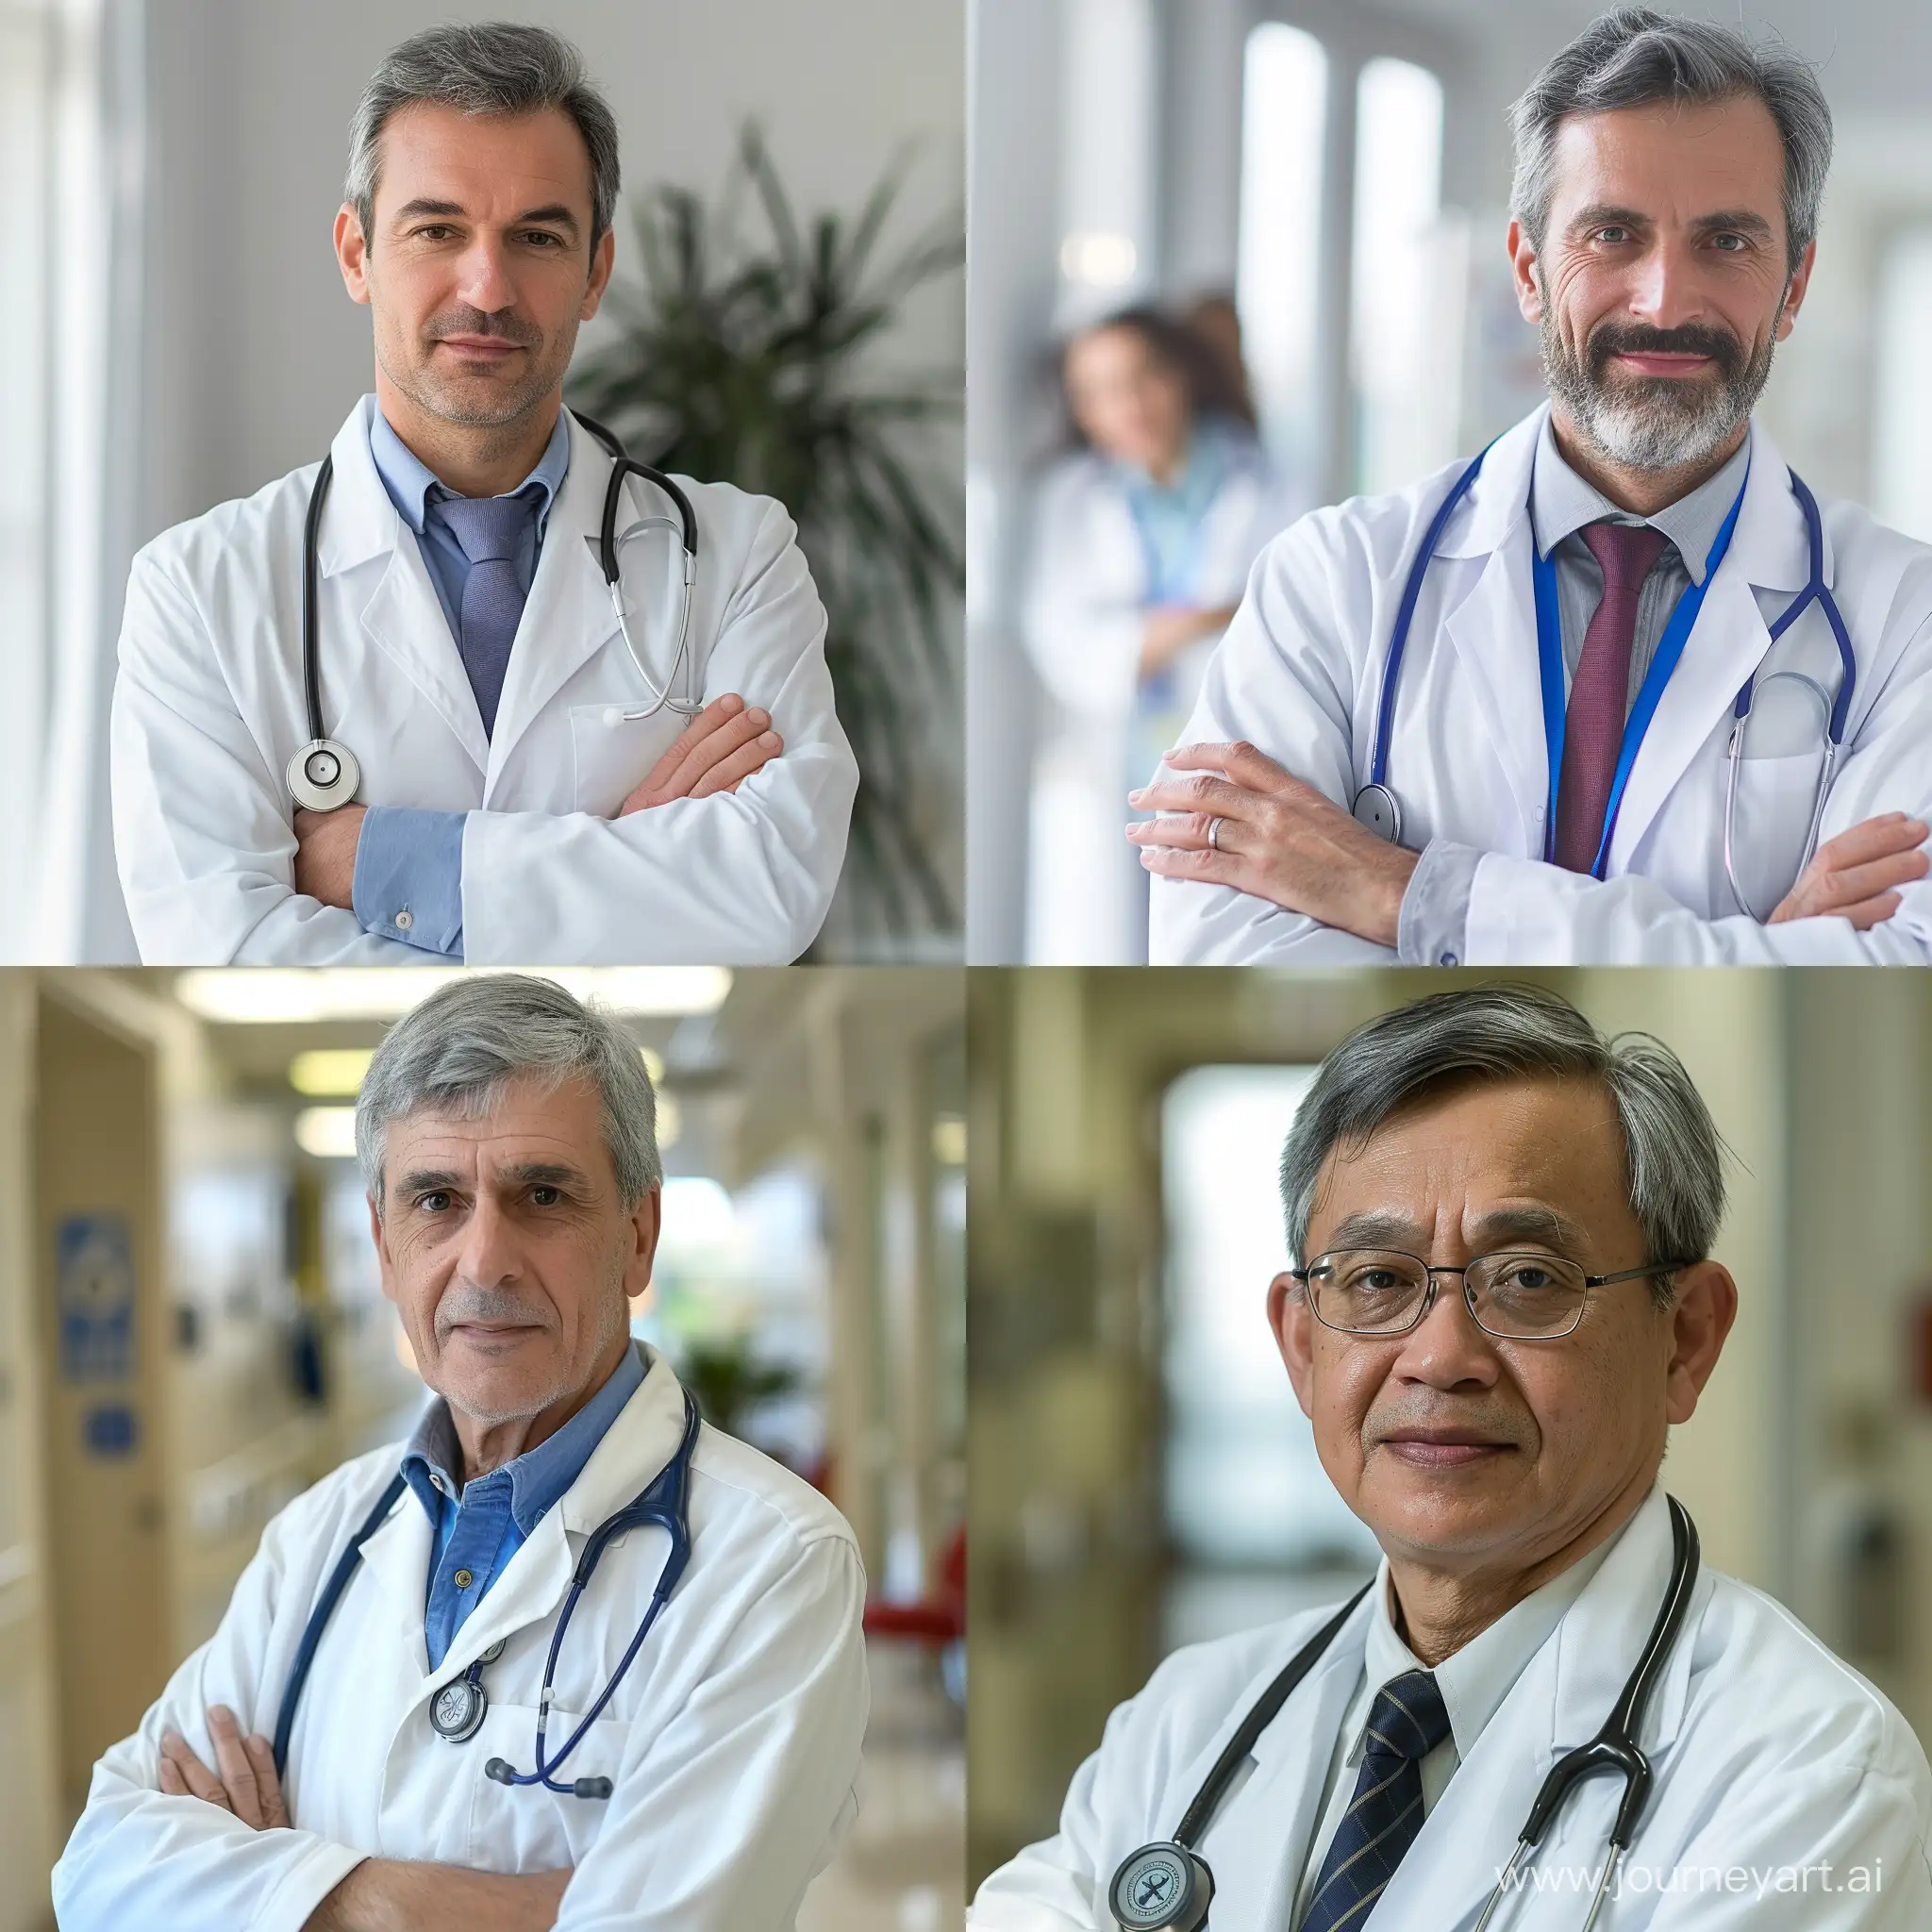 Hospitals-Chief-Physician-in-Command-with-Authority